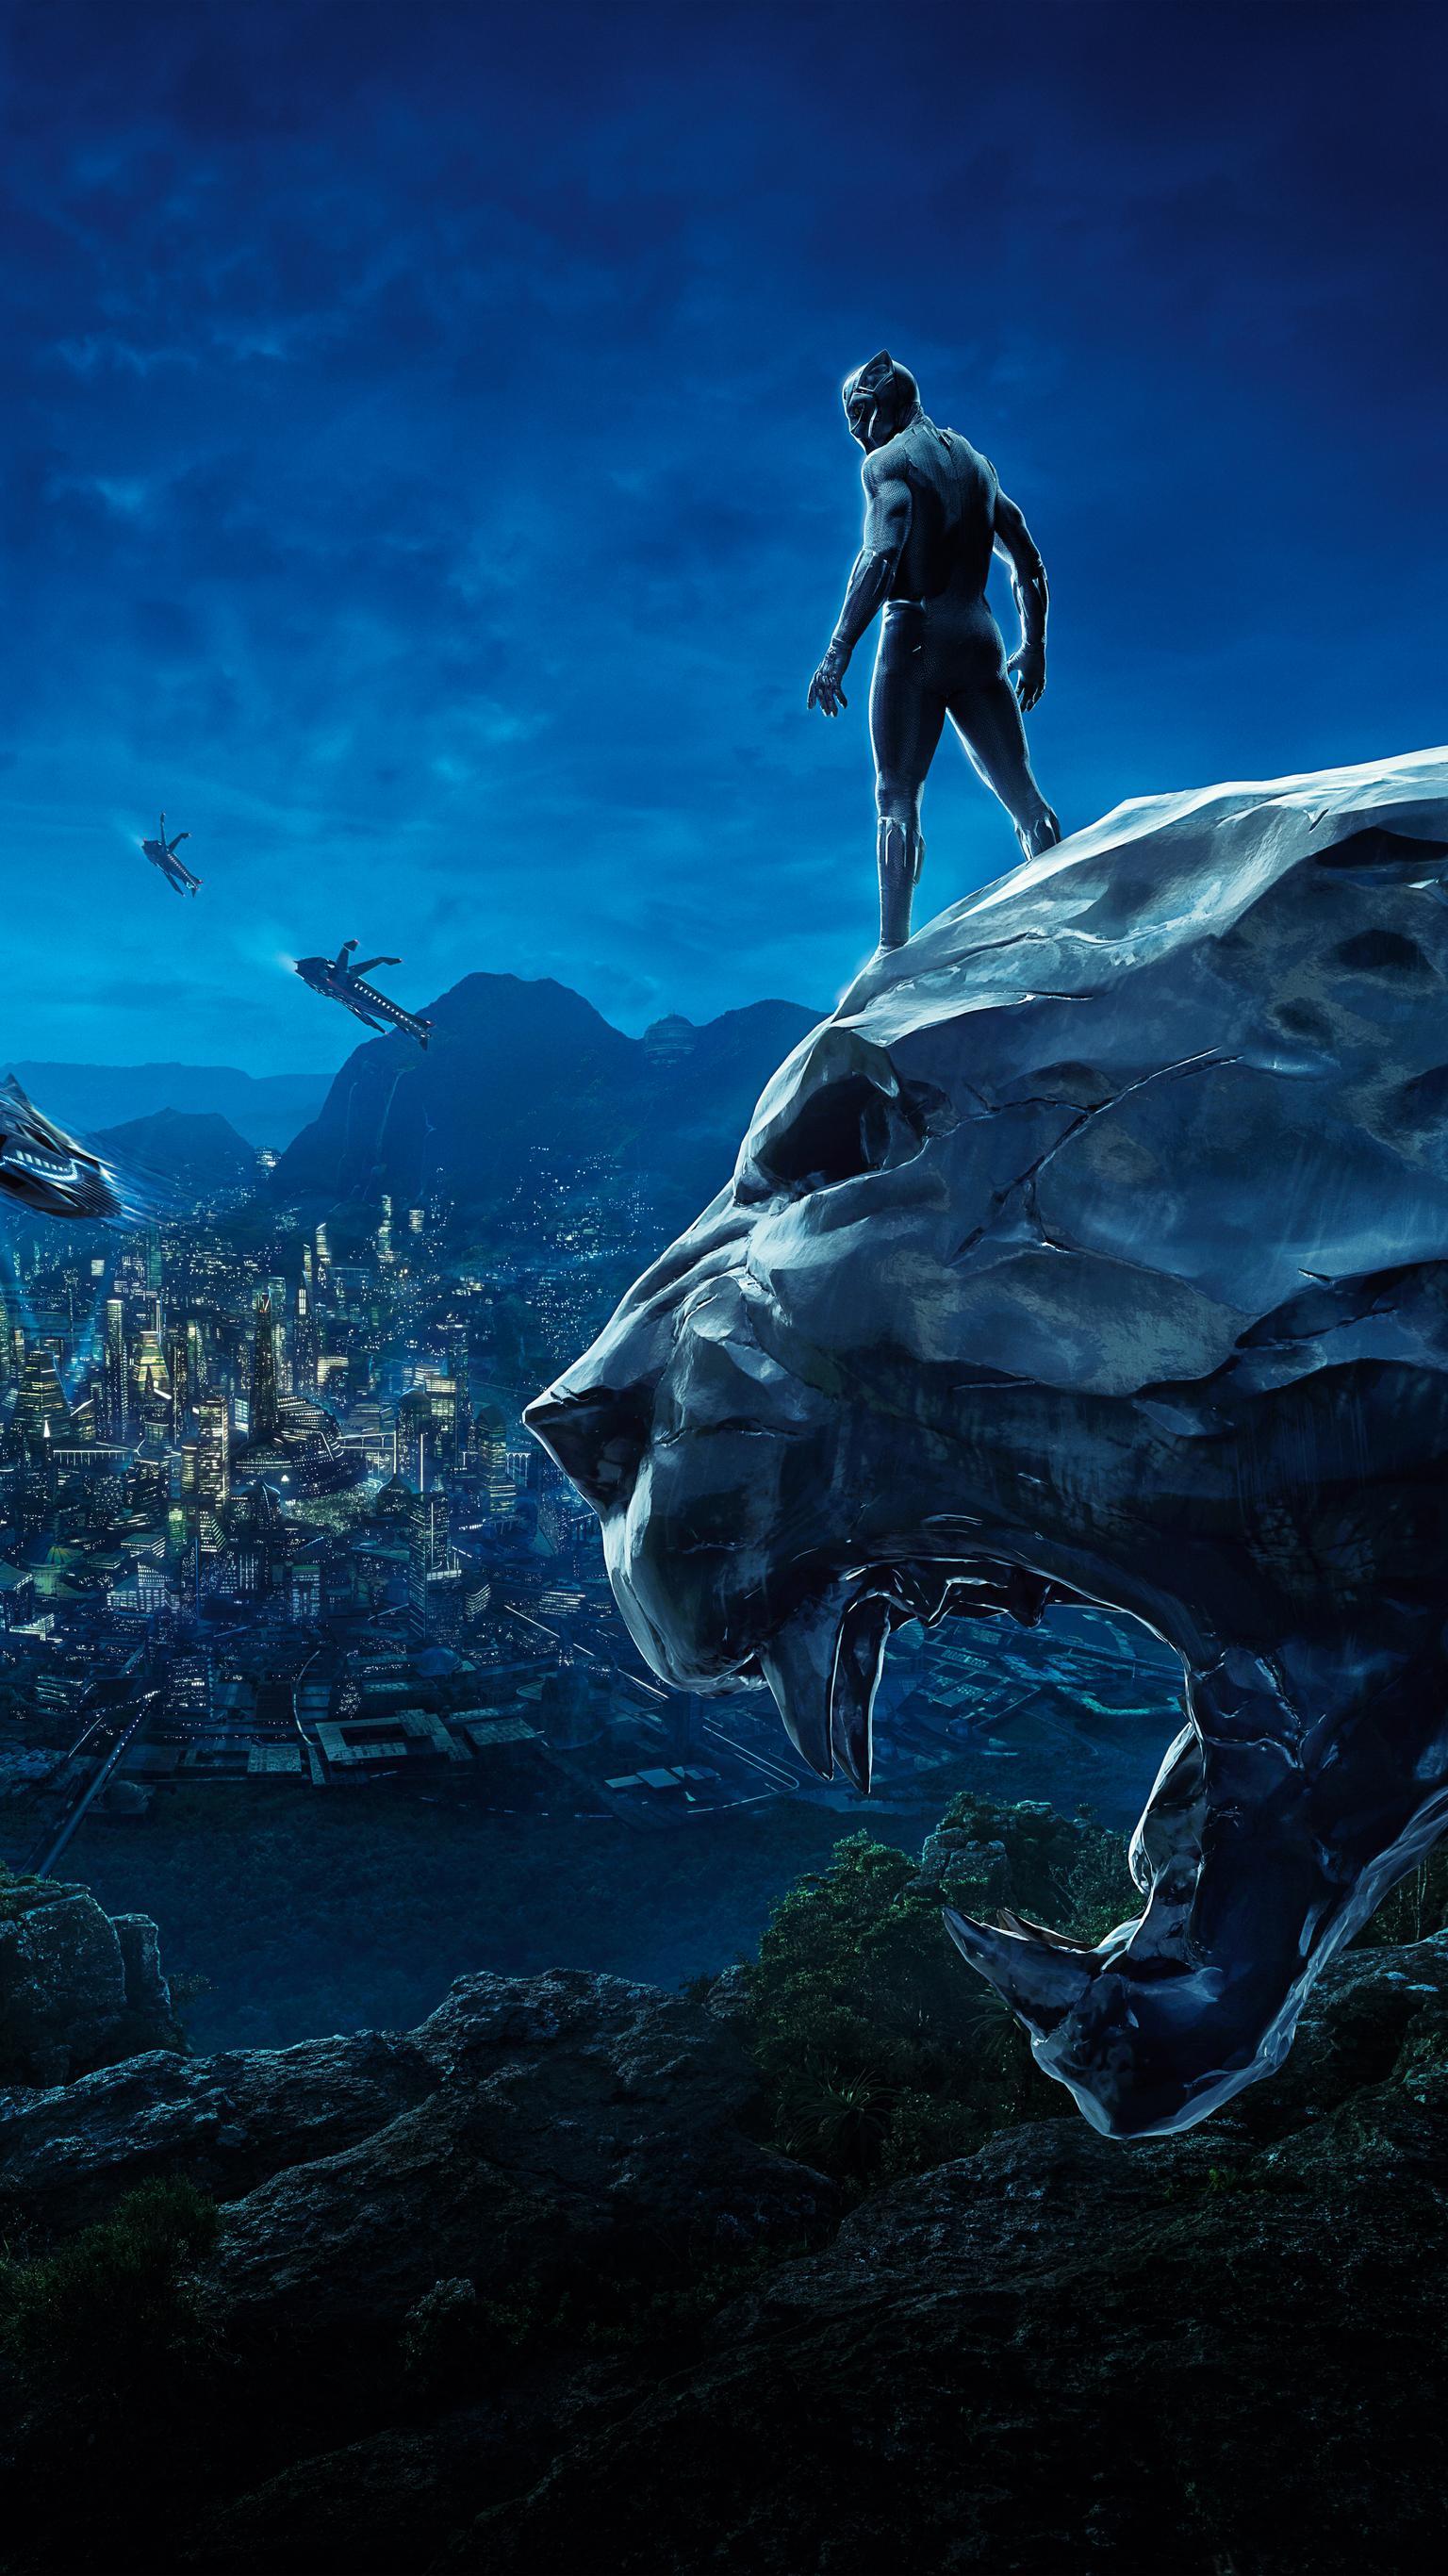 Black Panther: Wakanda Forever for windows download